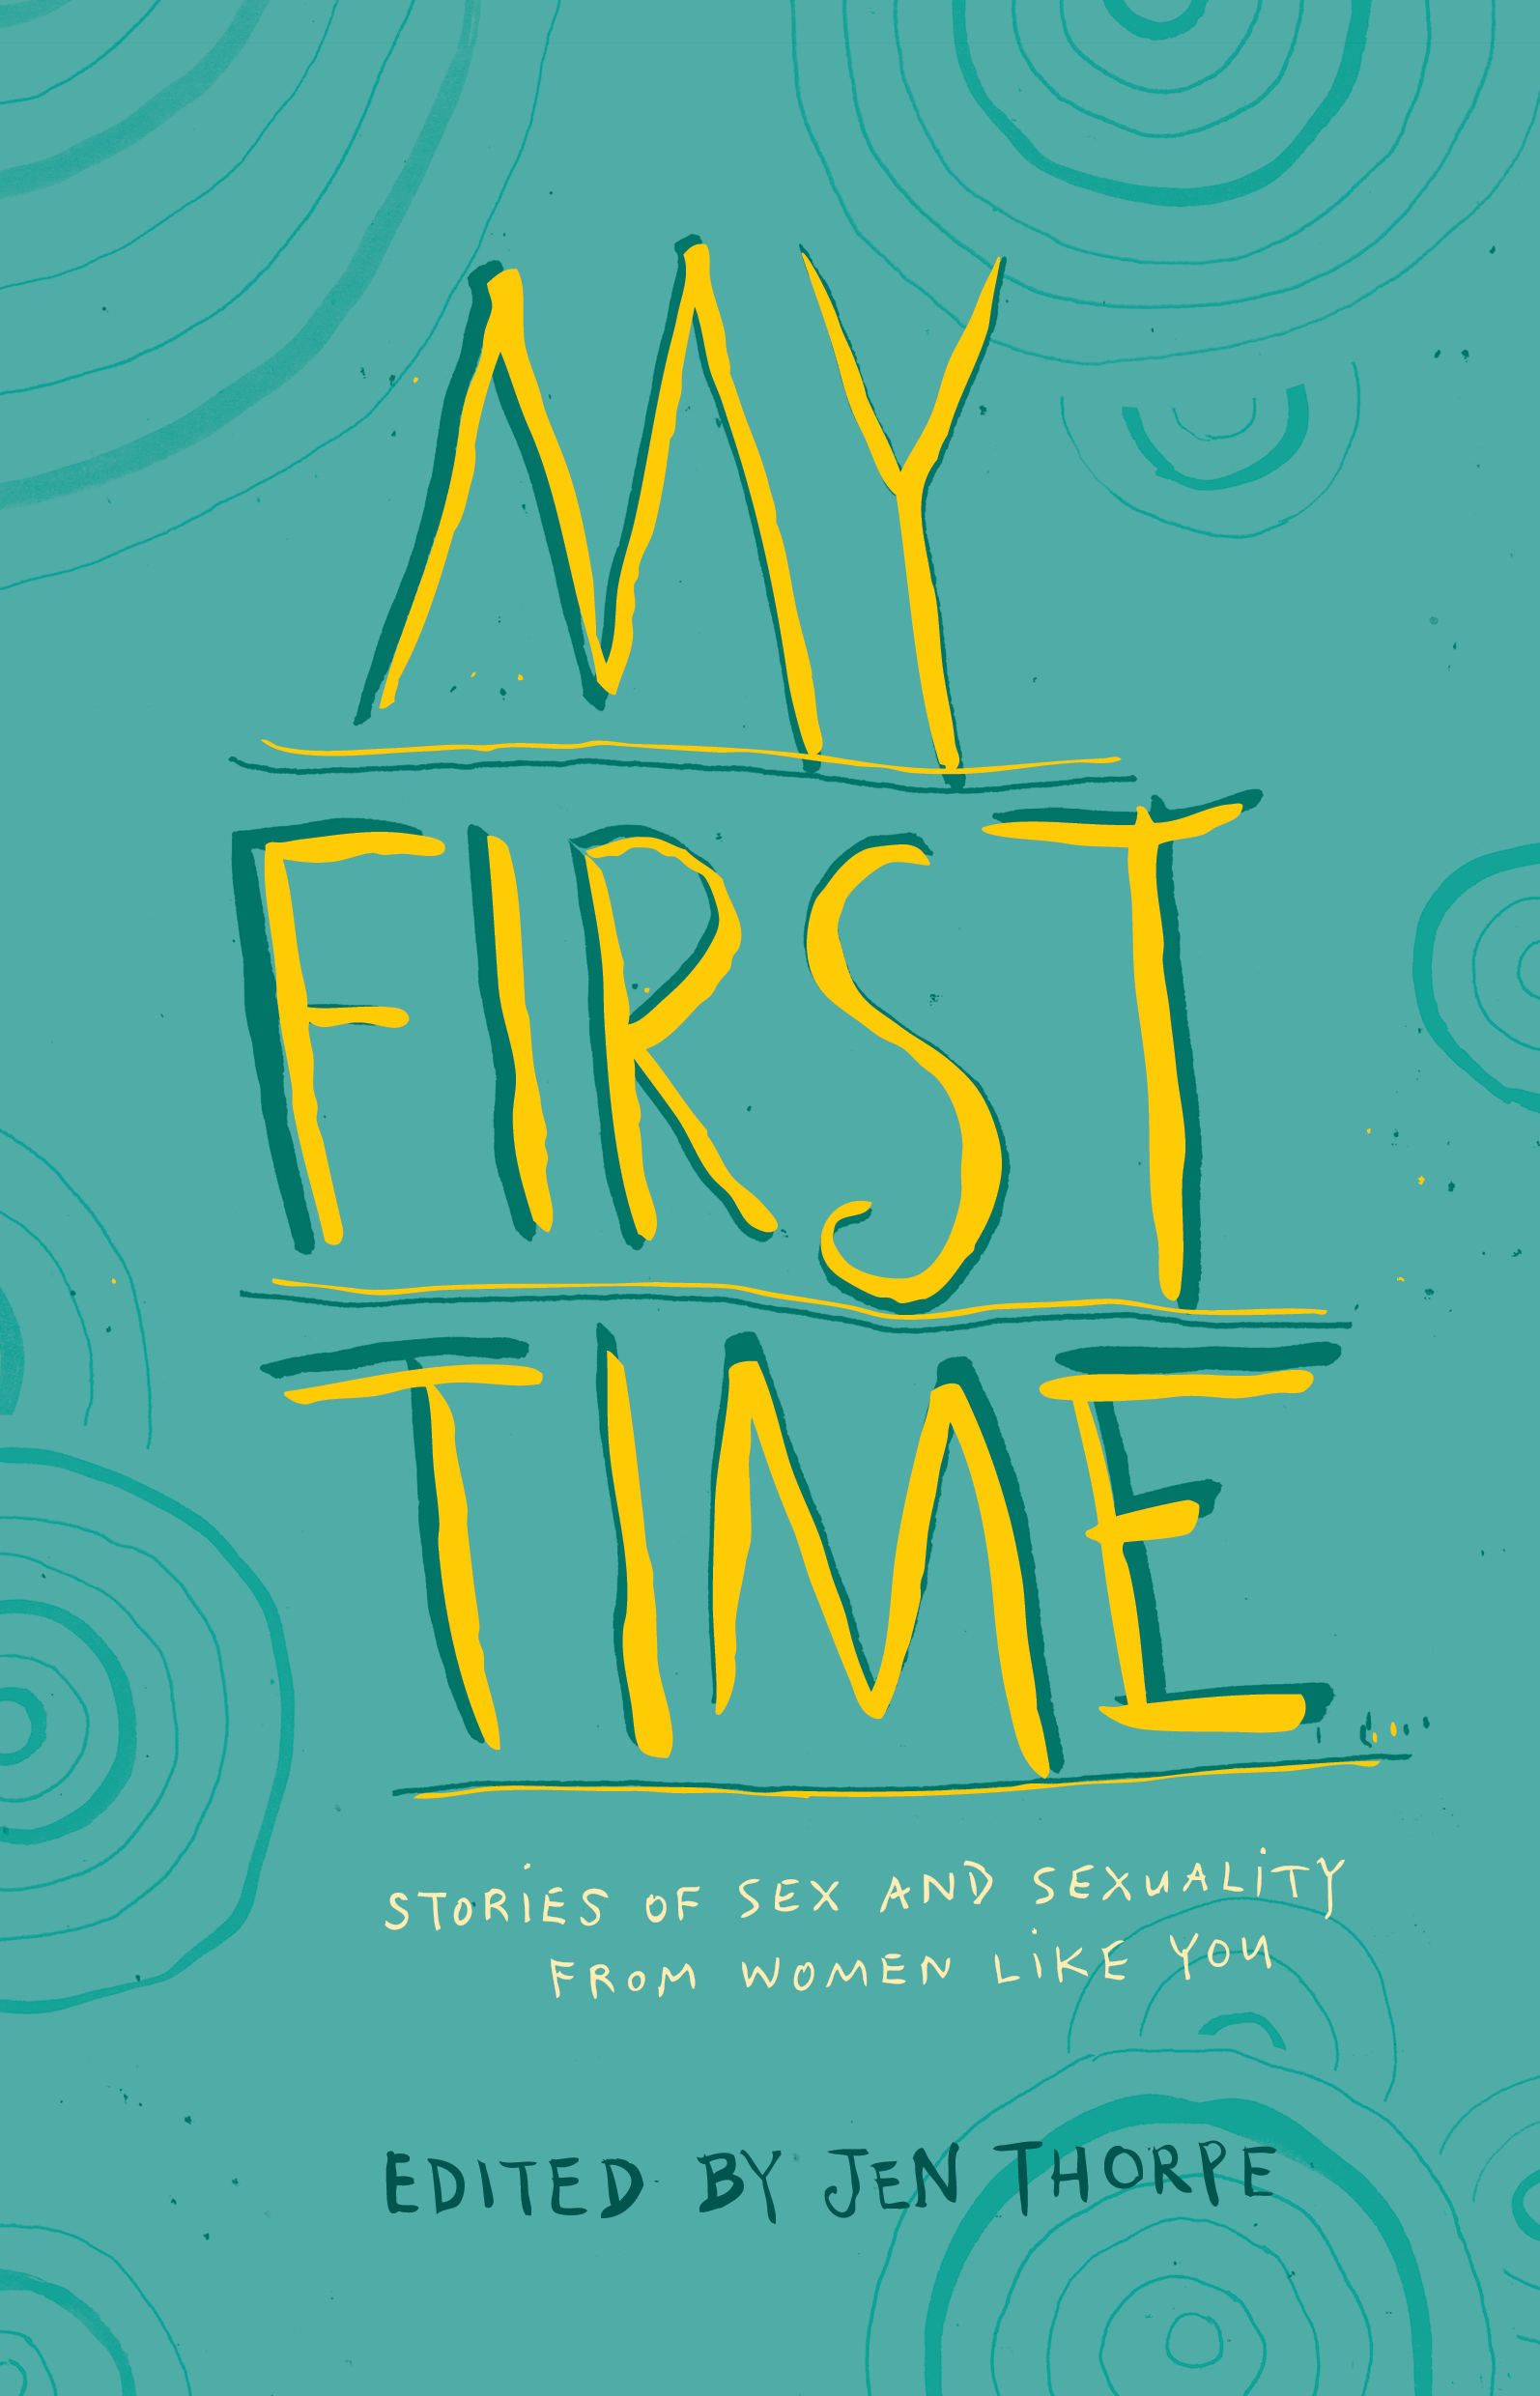 stories of first times